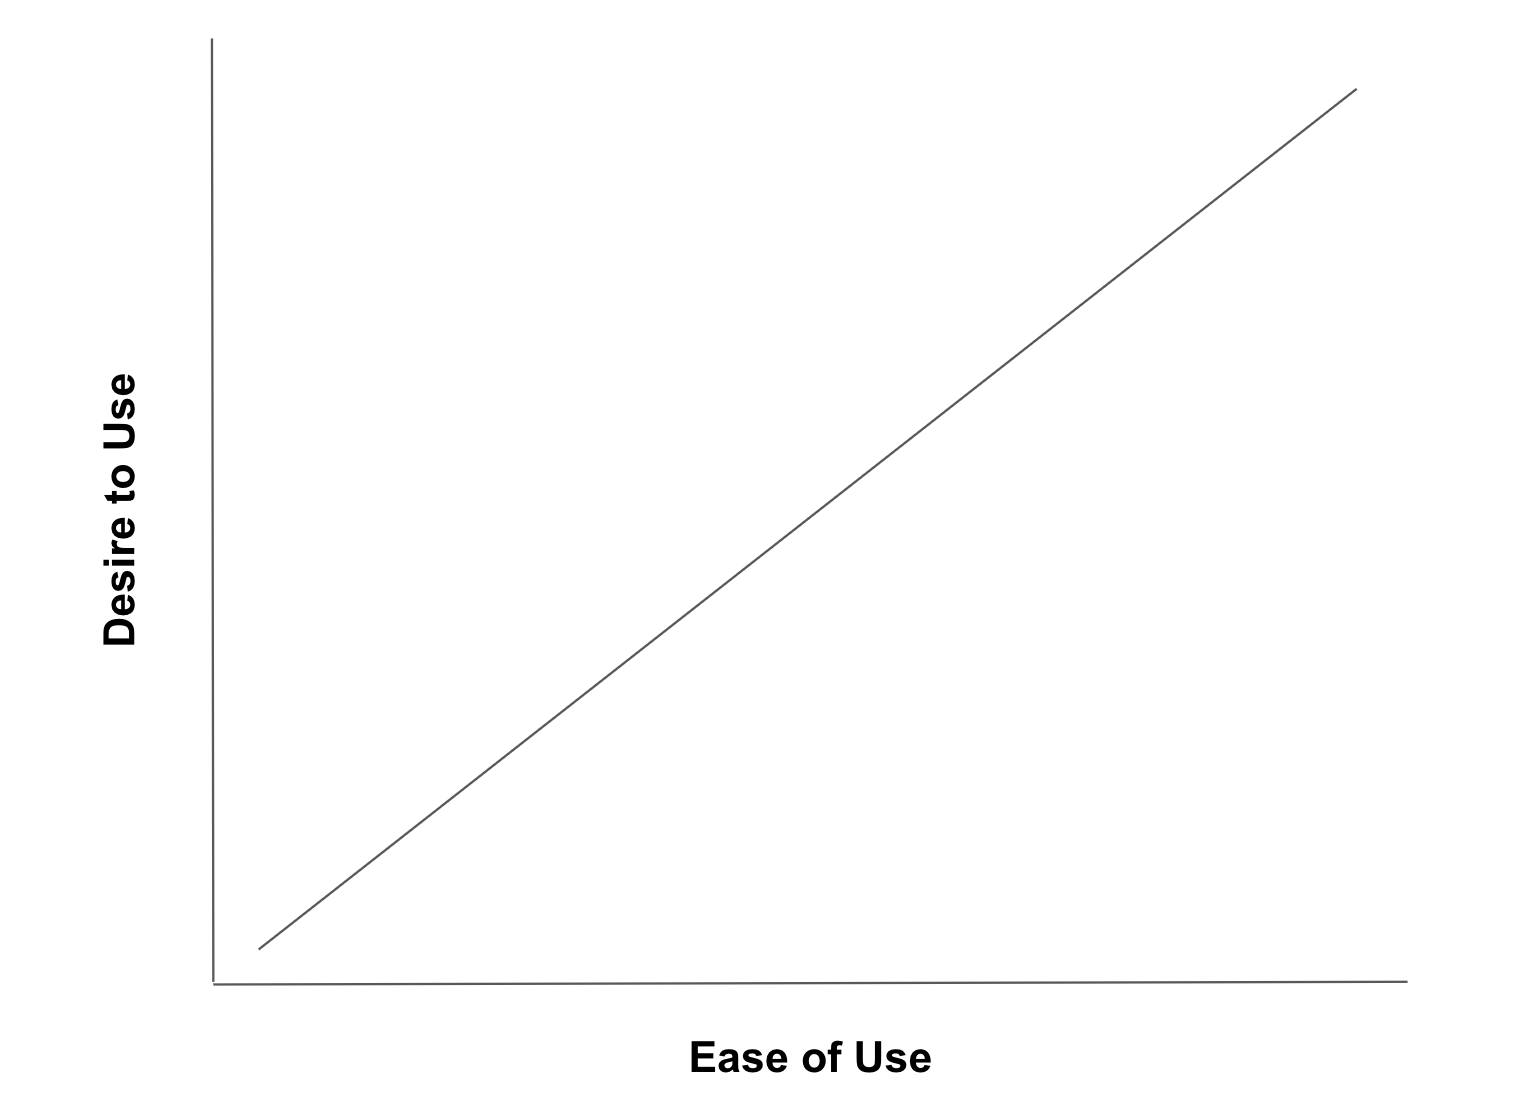 desire-to-use-ease-of-use-chart